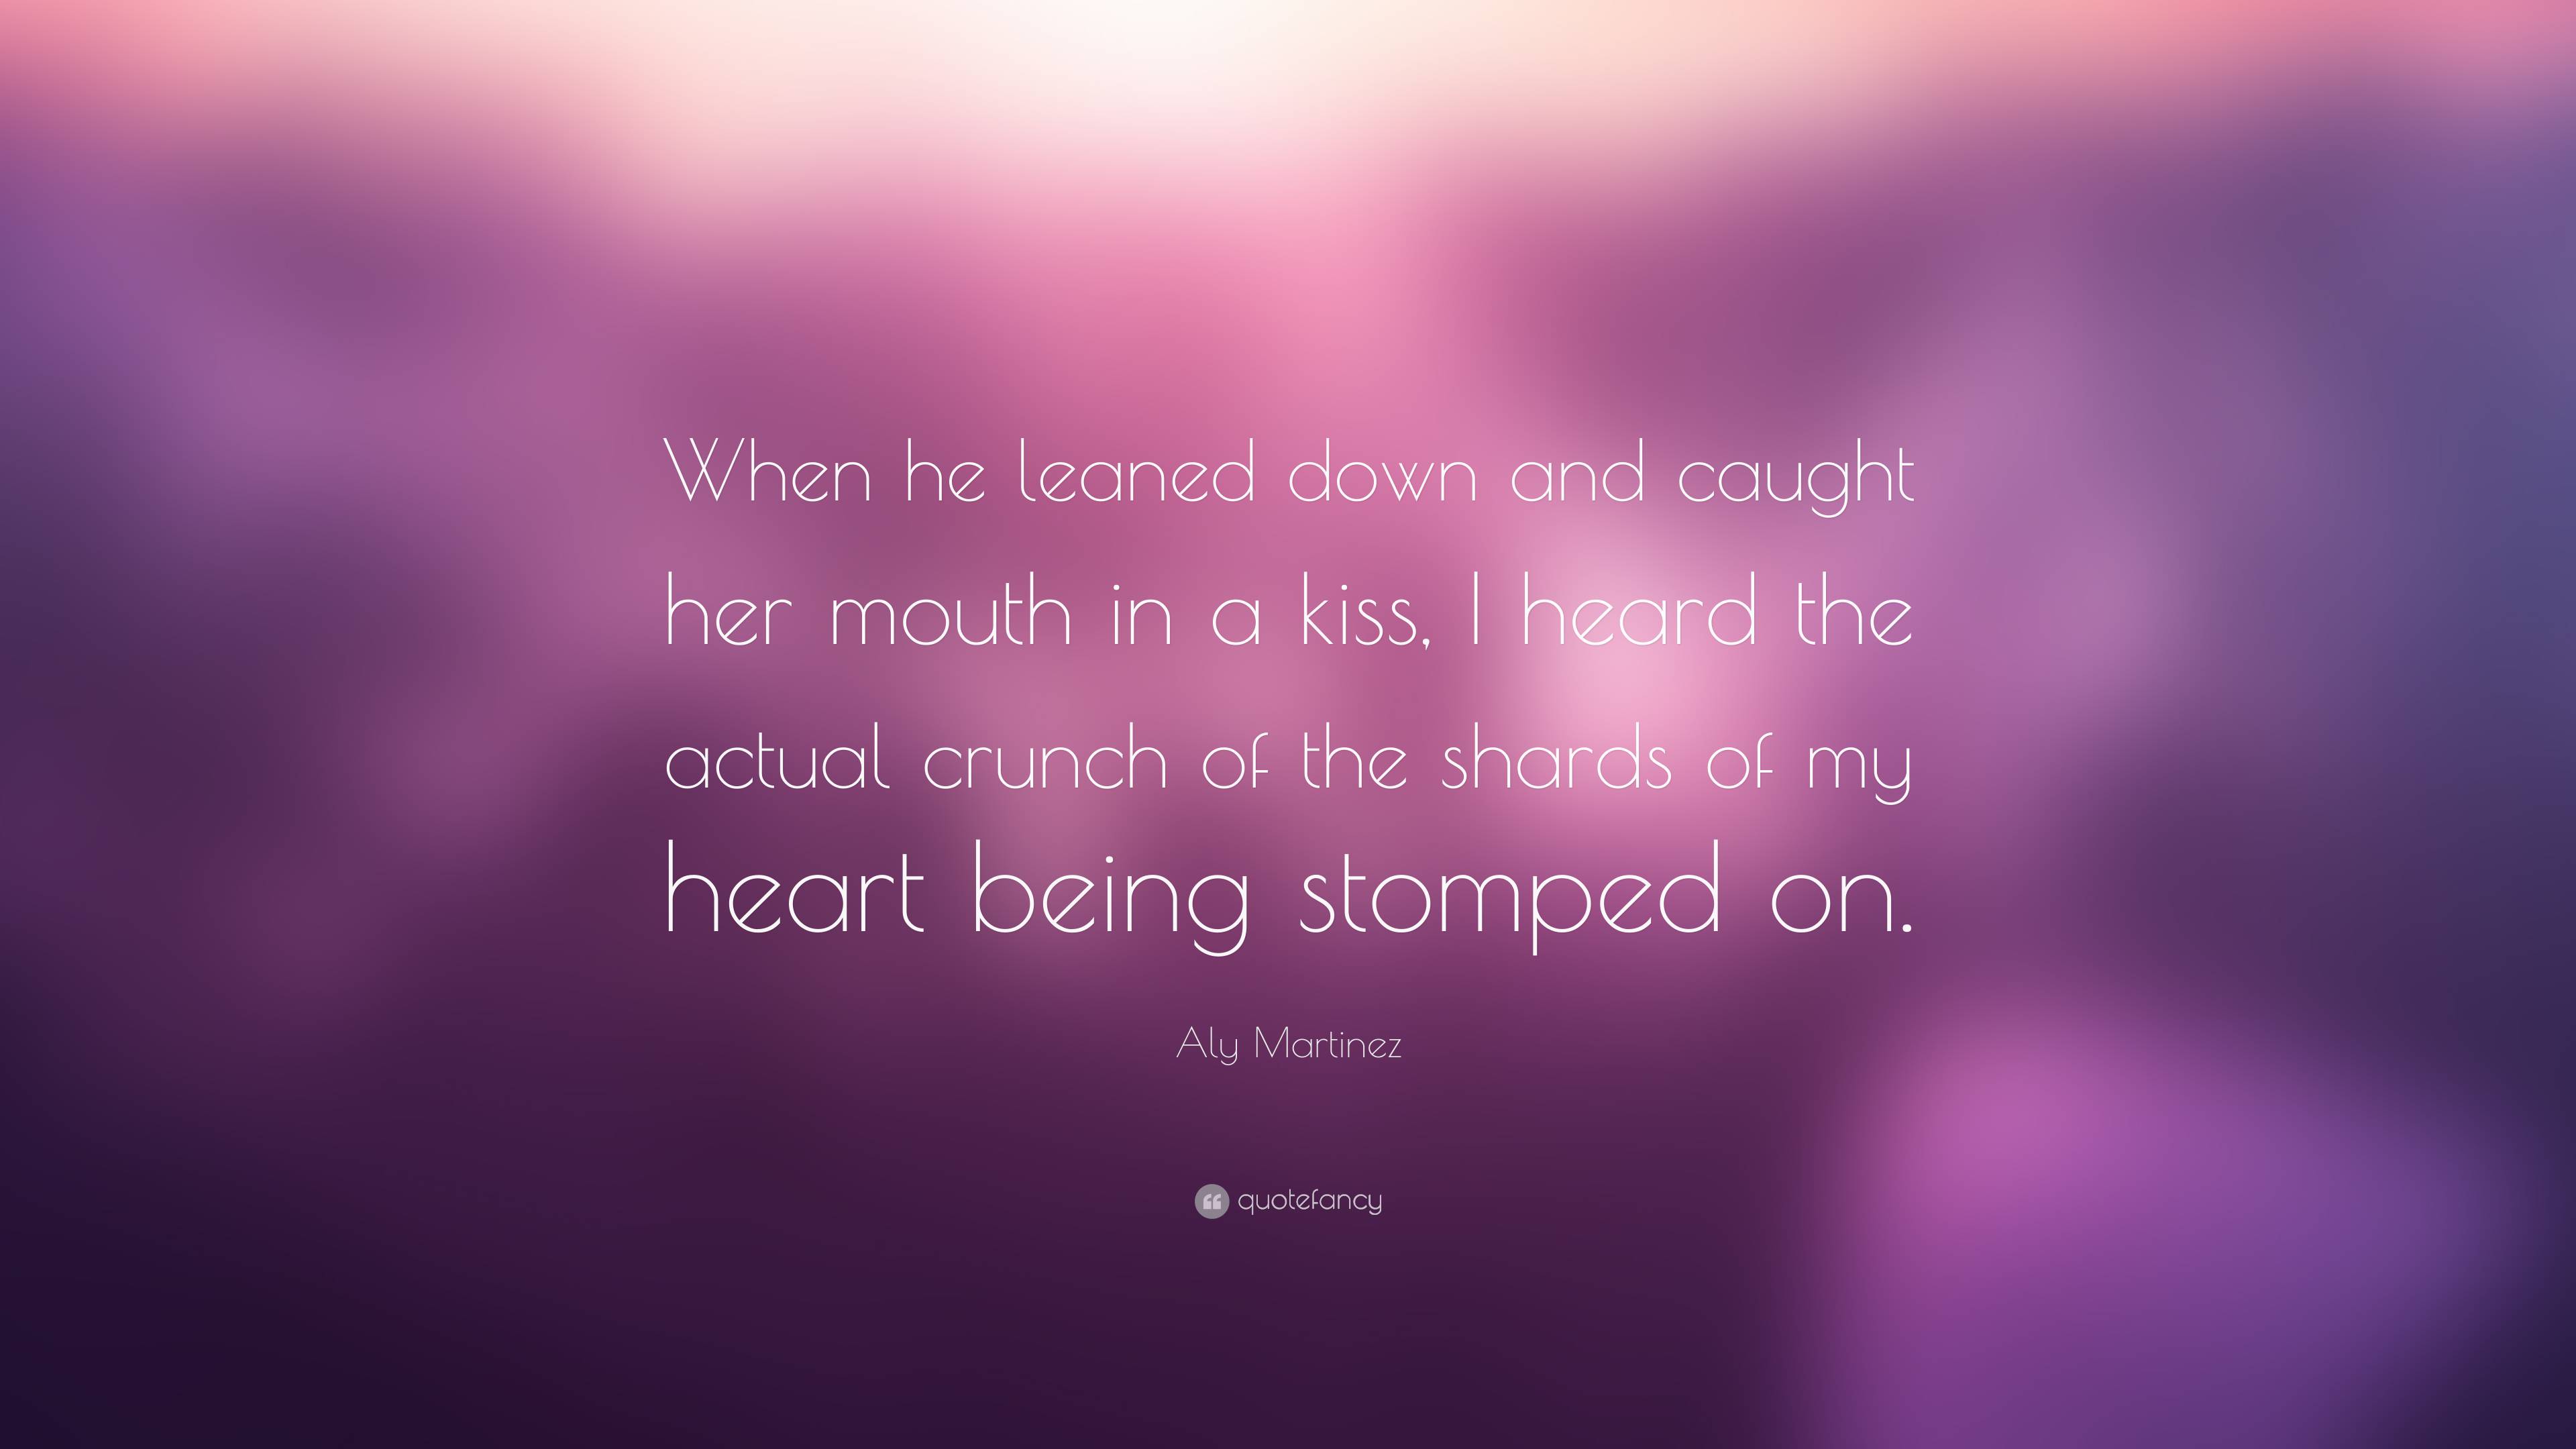 Aly Martinez Quote: “When he leaned down and caught her mouth in a kiss ...